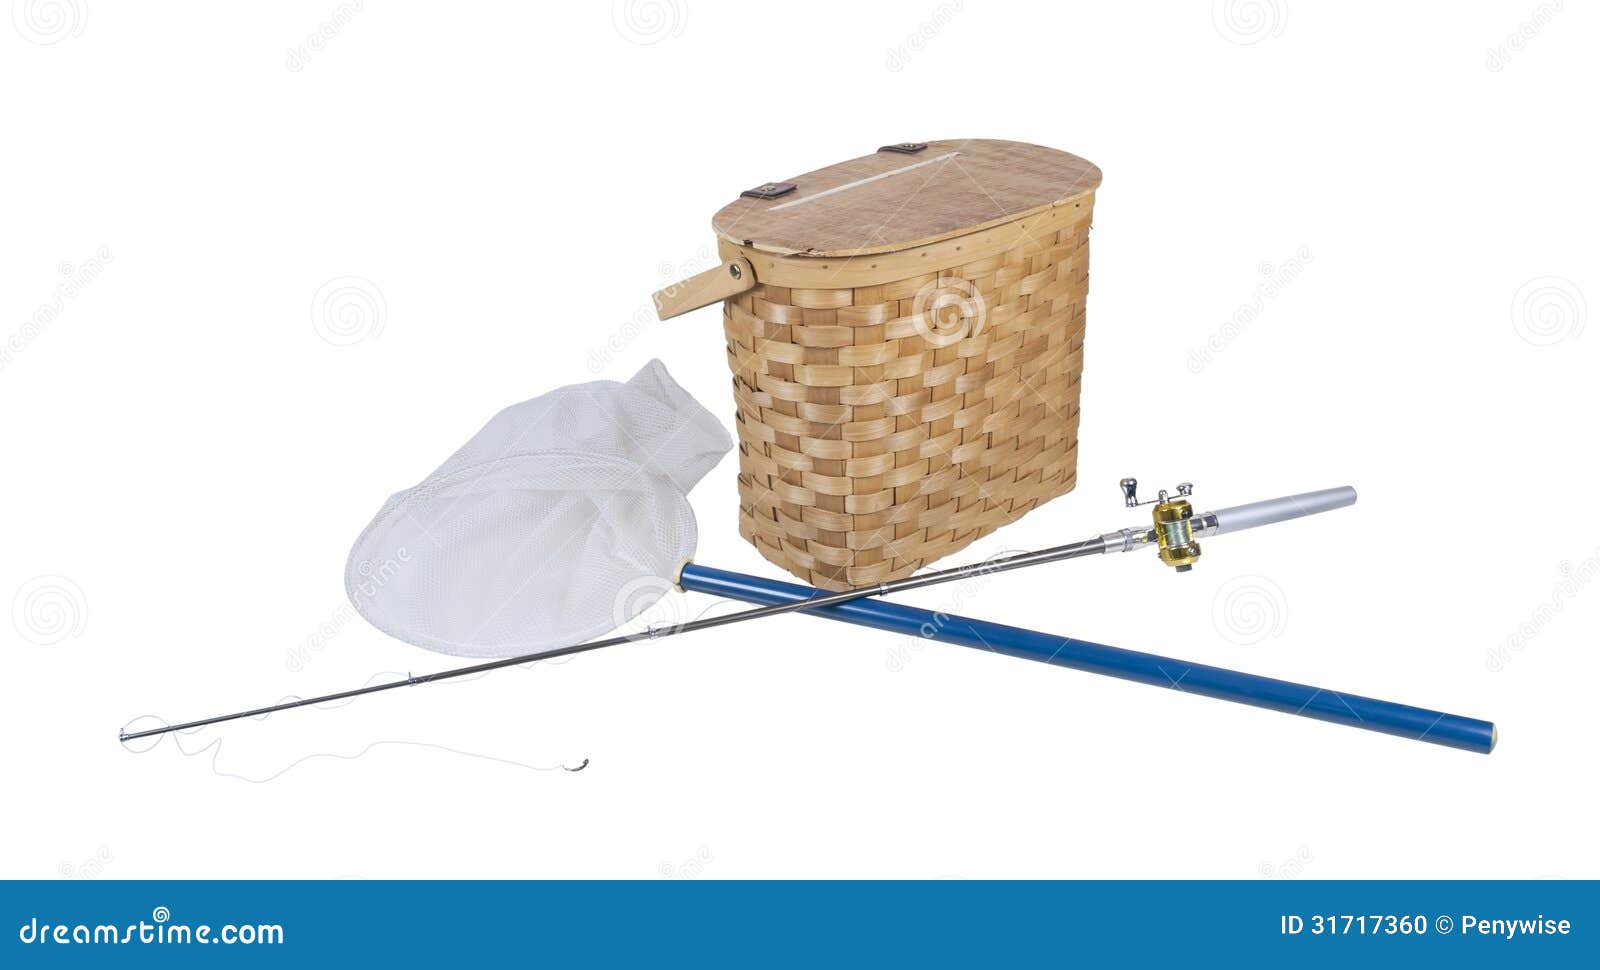 Fishing Pole with Net and Fish Basket Stock Photo - Image of weave, sports:  31717360